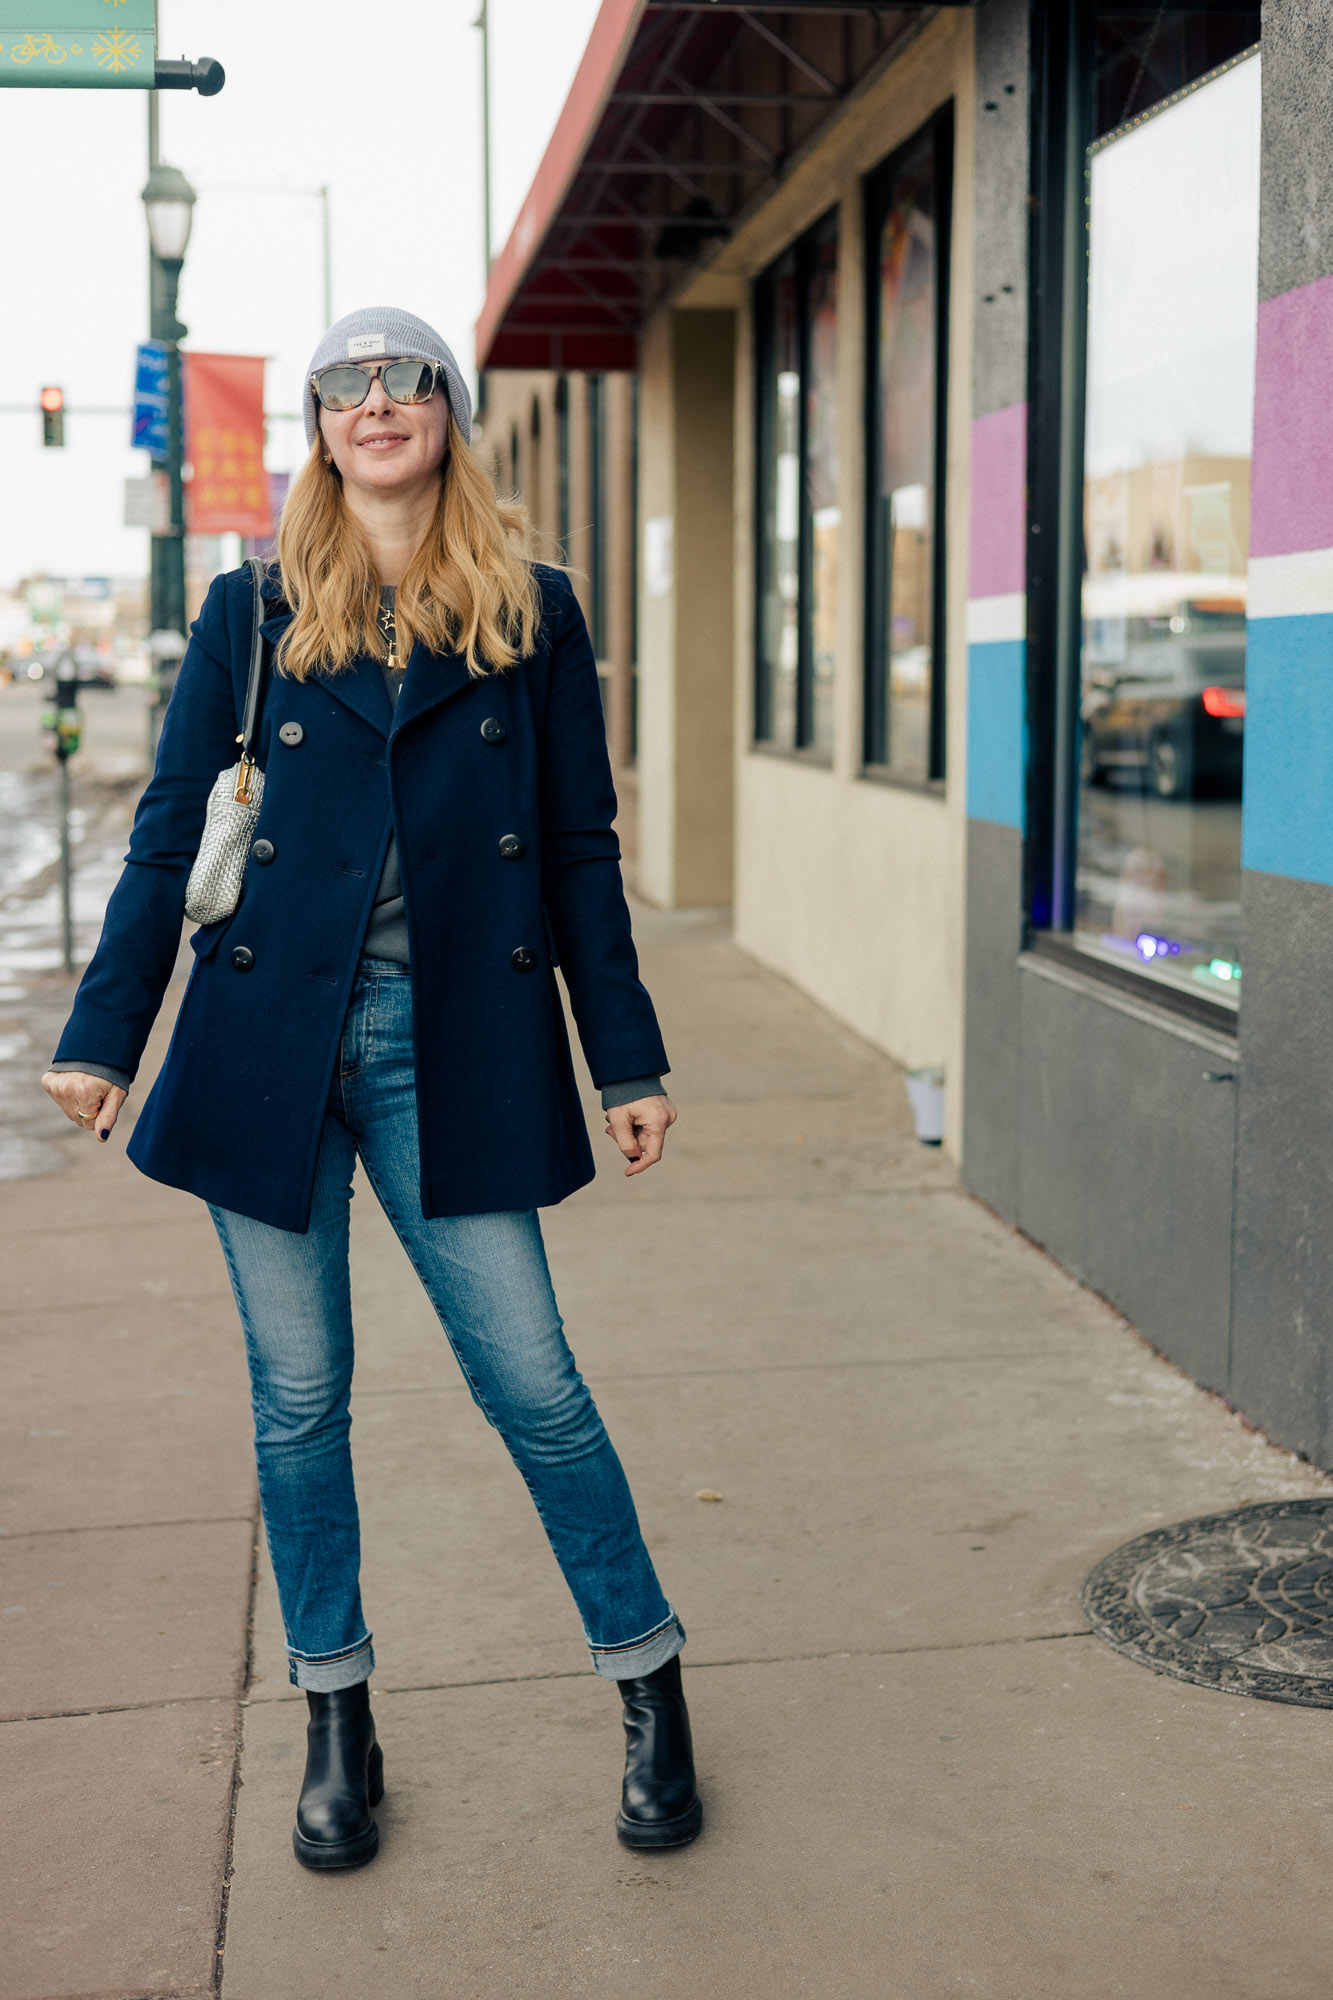 Wearing a navy Fleurette peacoat with a Rag and Bone beanie, AG jeans and Stuart Weitzman lug boots.